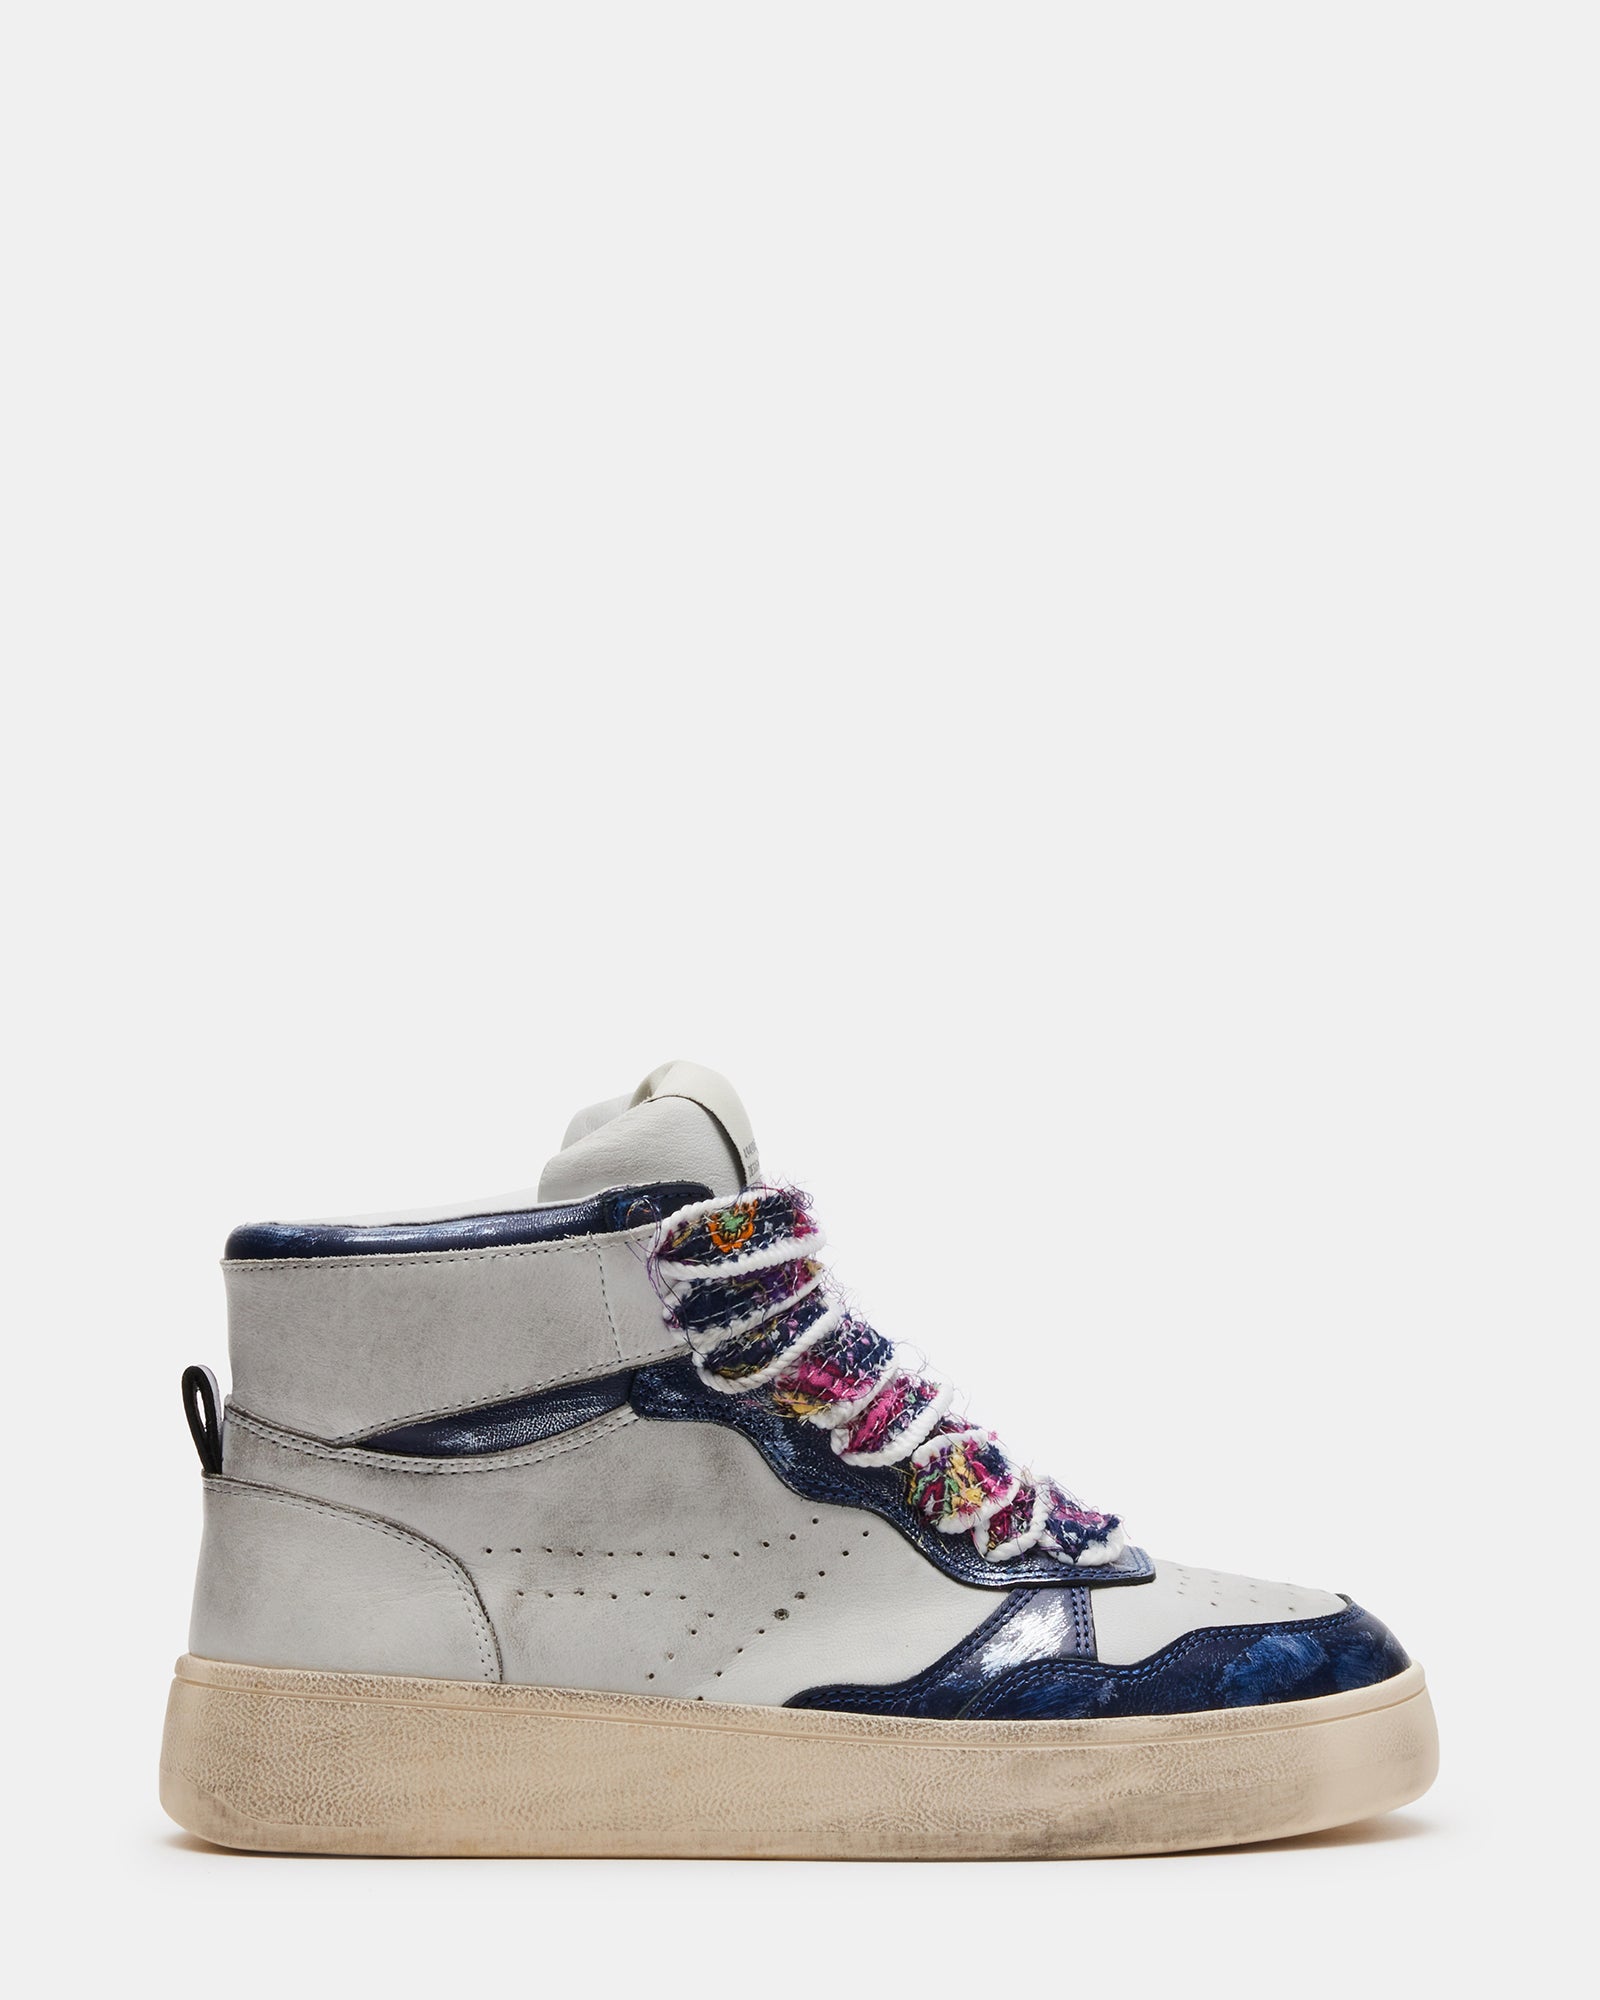 ENDLESS Multi High-Top Lace-Up Sneaker | Women's Sneakers – Steve Madden